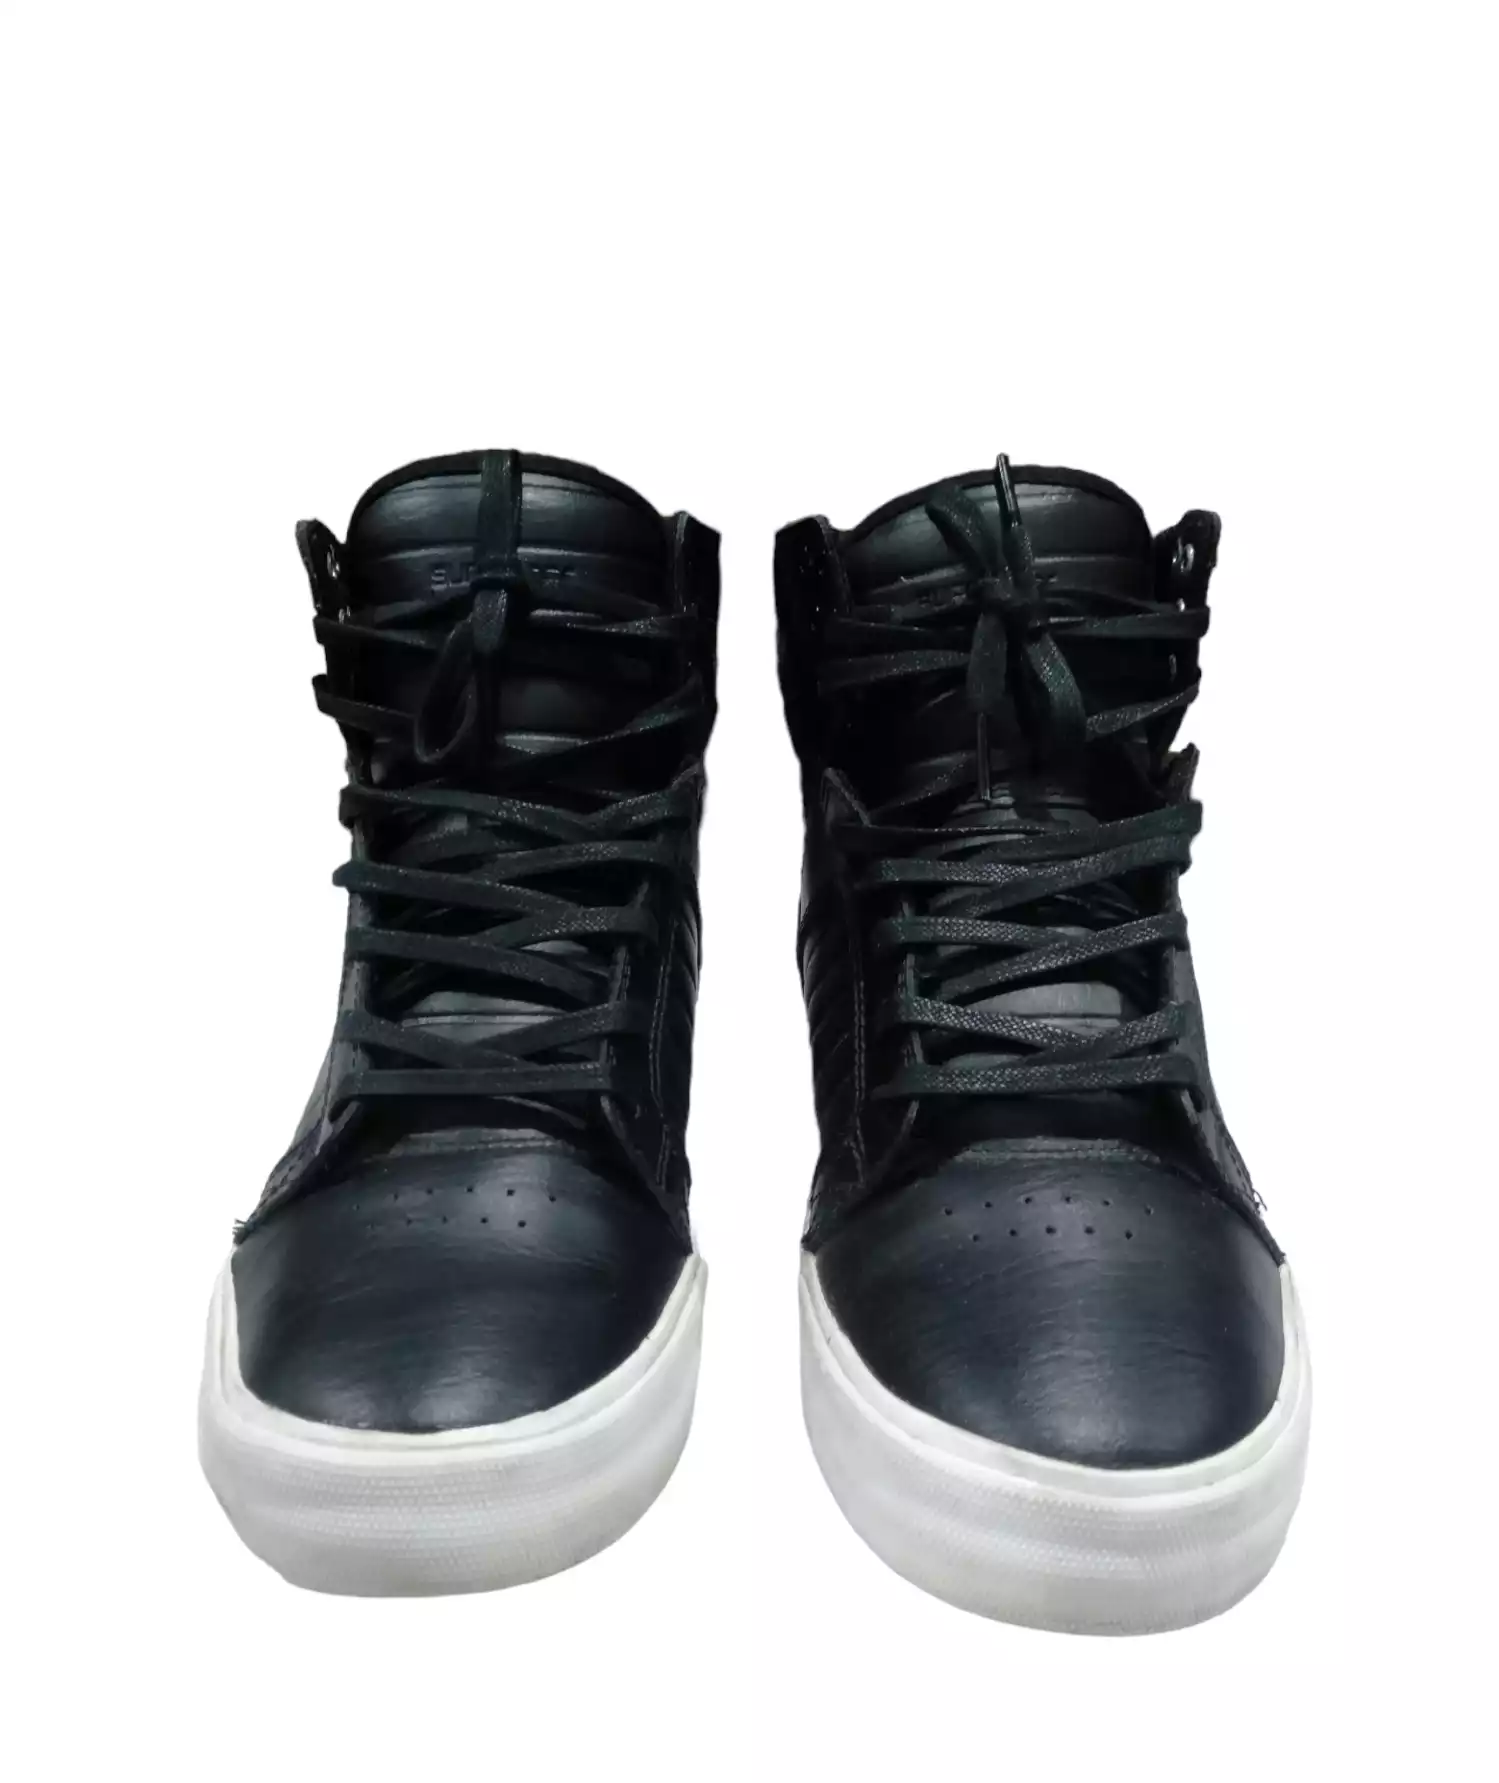 Shoes by Supra